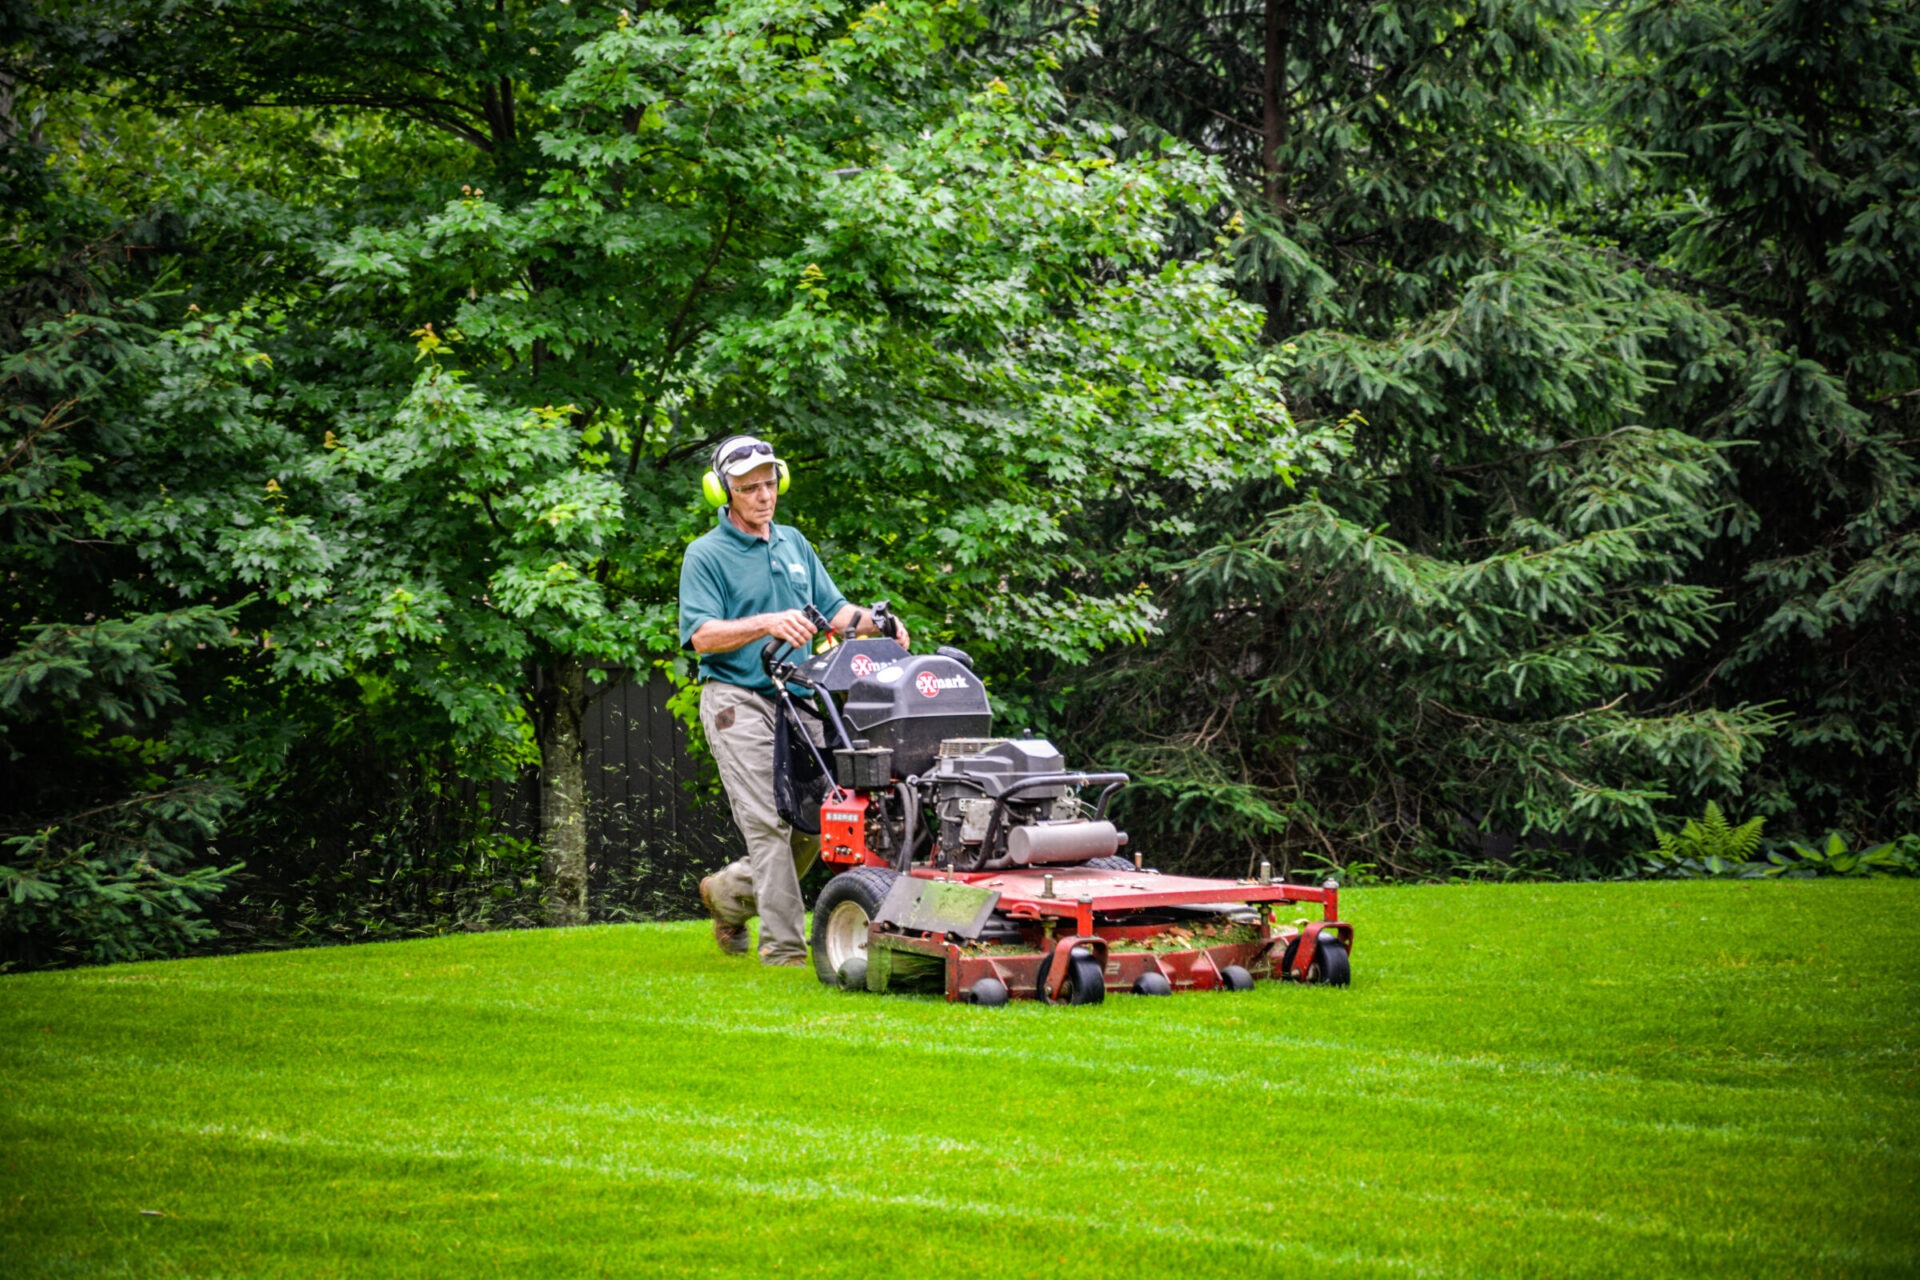 A person mows a lush green lawn using a red commercial riding lawn mower, with dense trees in the background during daylight.